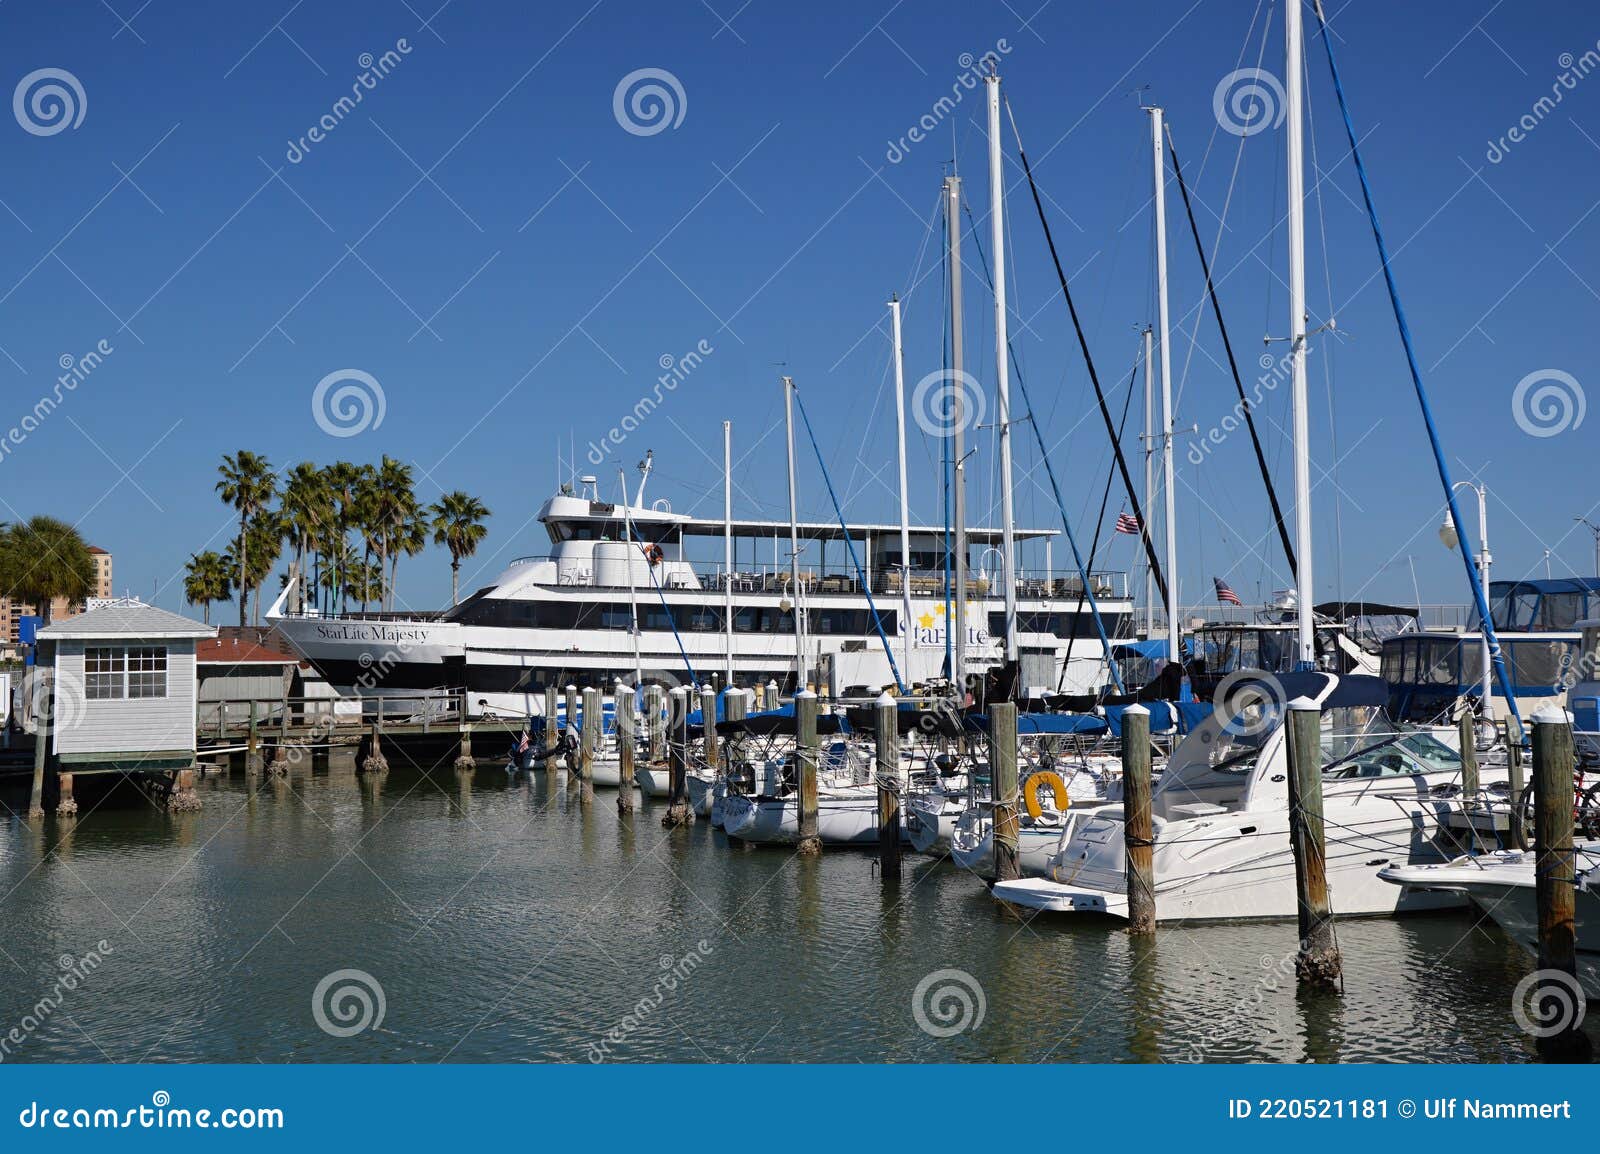 Marina at the Gulf of Mexico, Clearwater Beach, Florida Stock Image ...